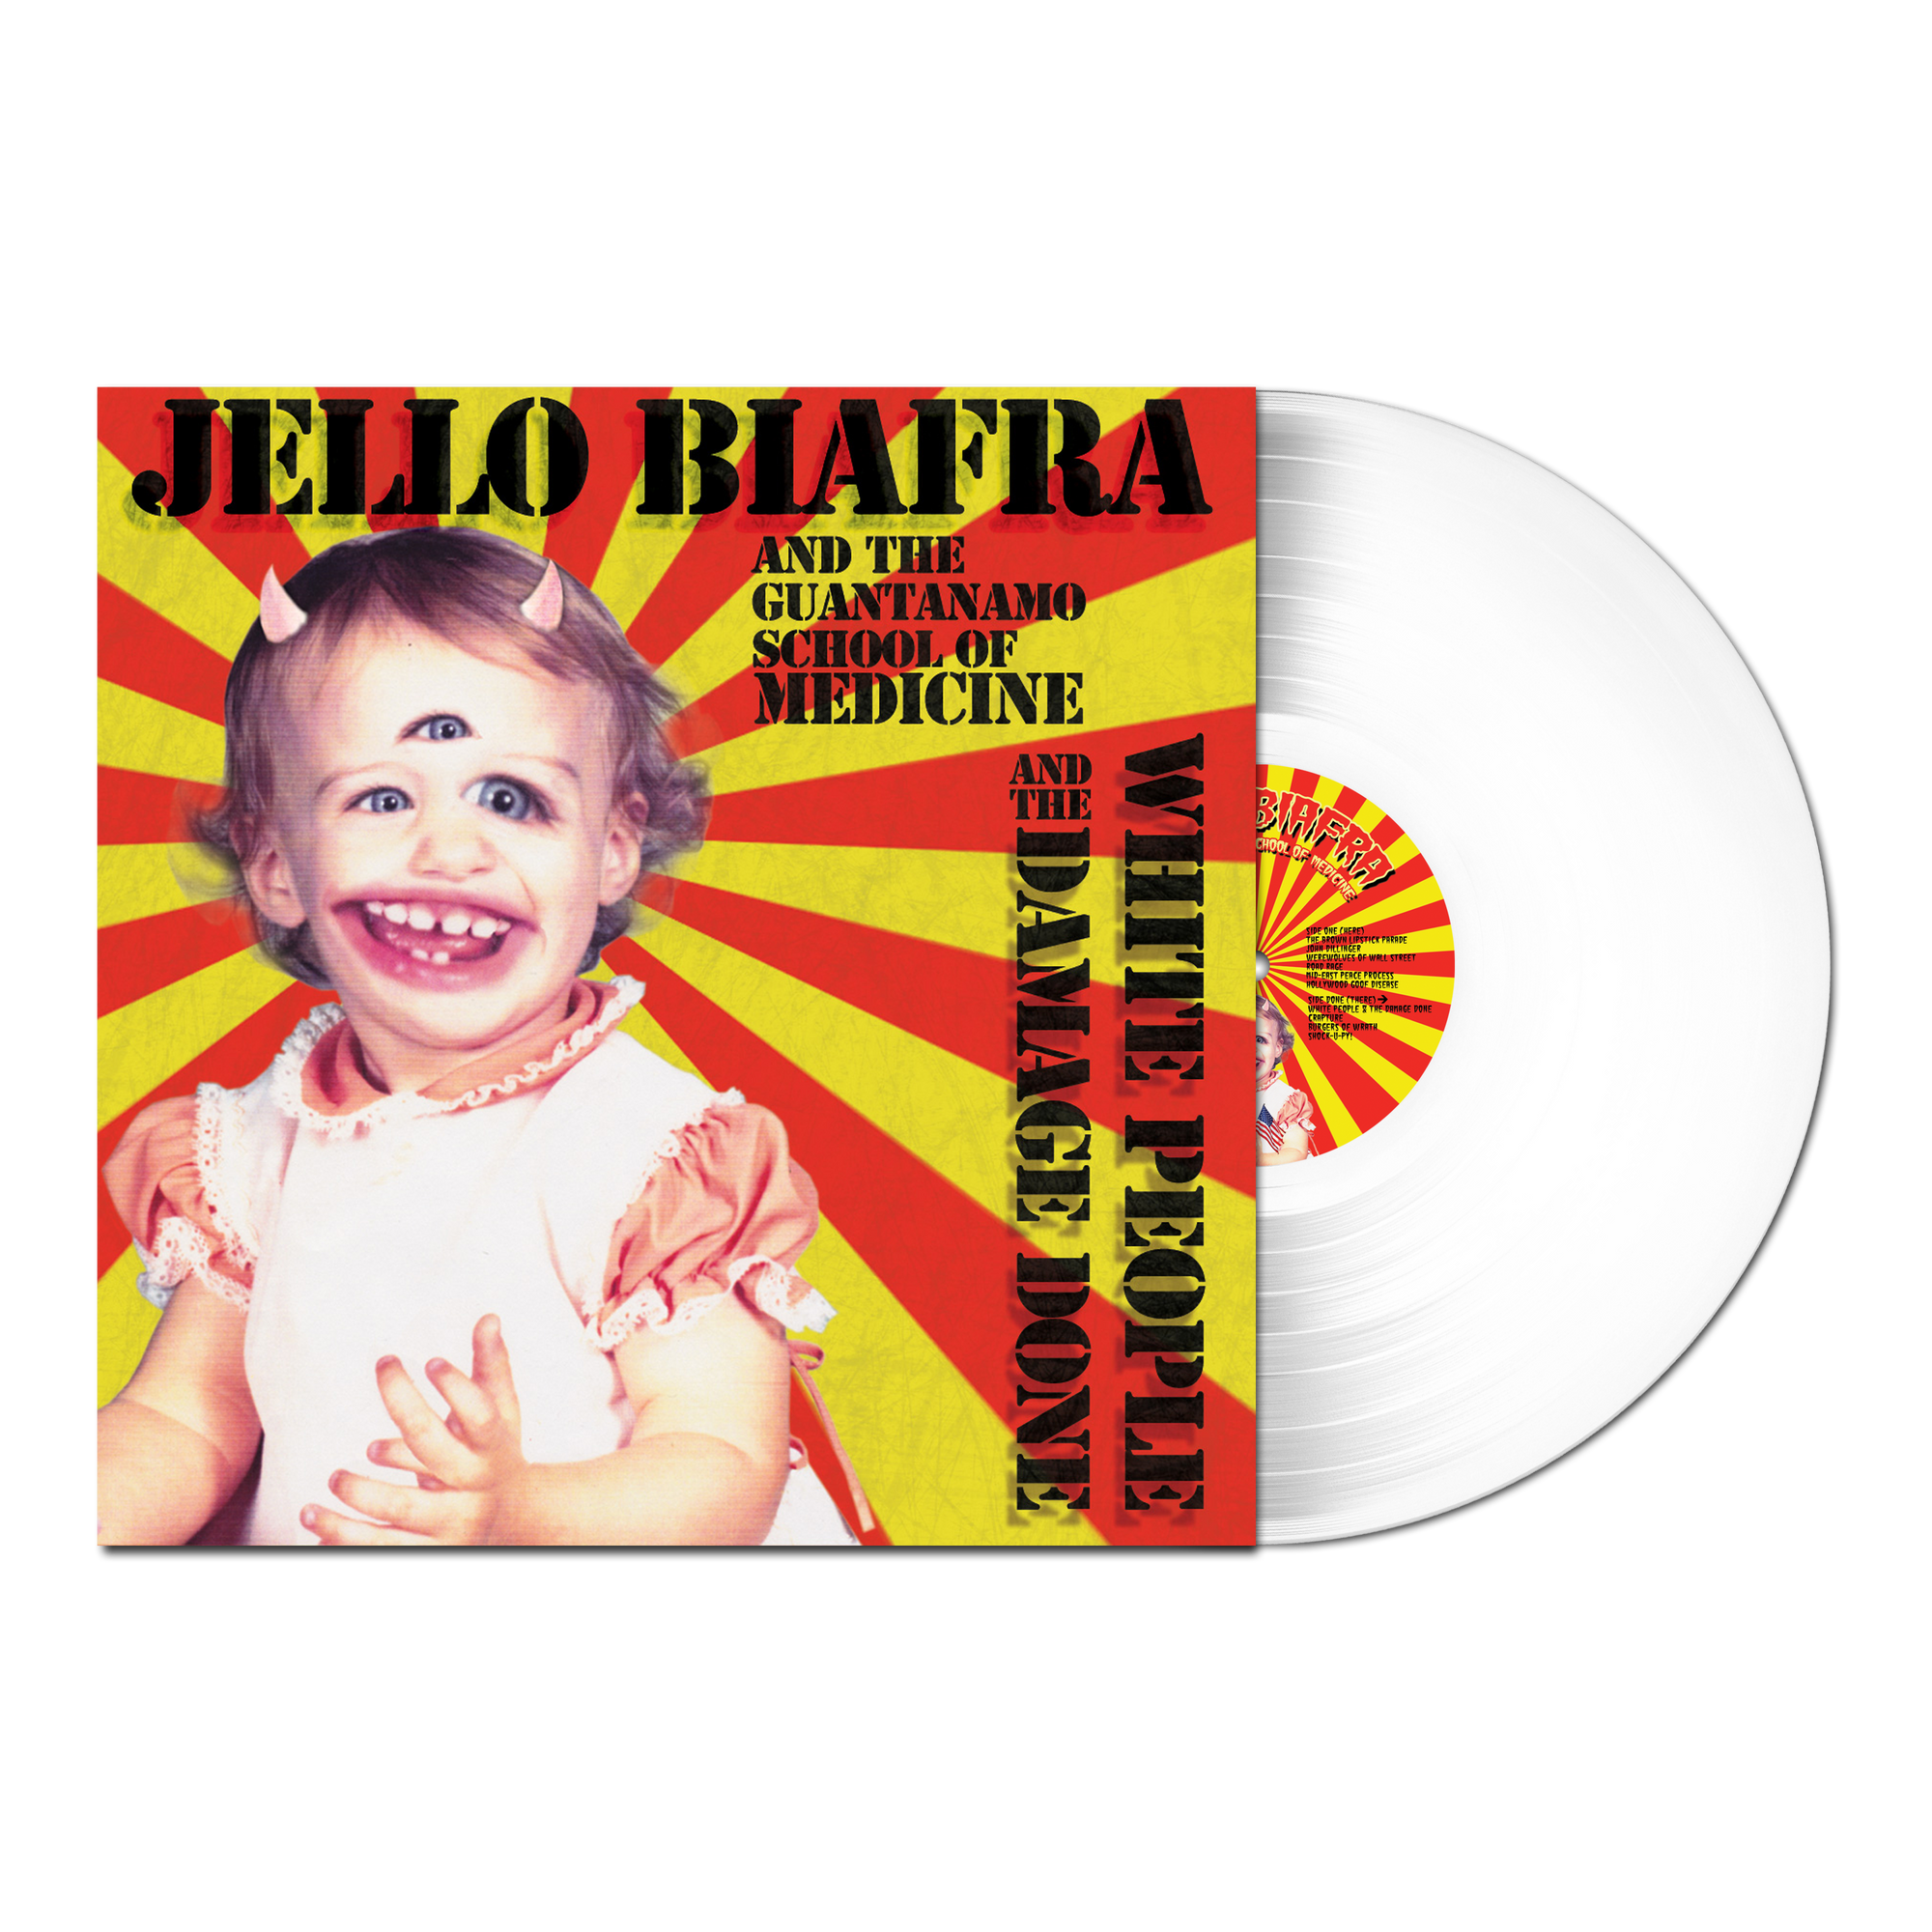 v450 - Jello Biafra And The Guantanamo School Of Medicine - "White People And The Damage Done" - Pre-Order